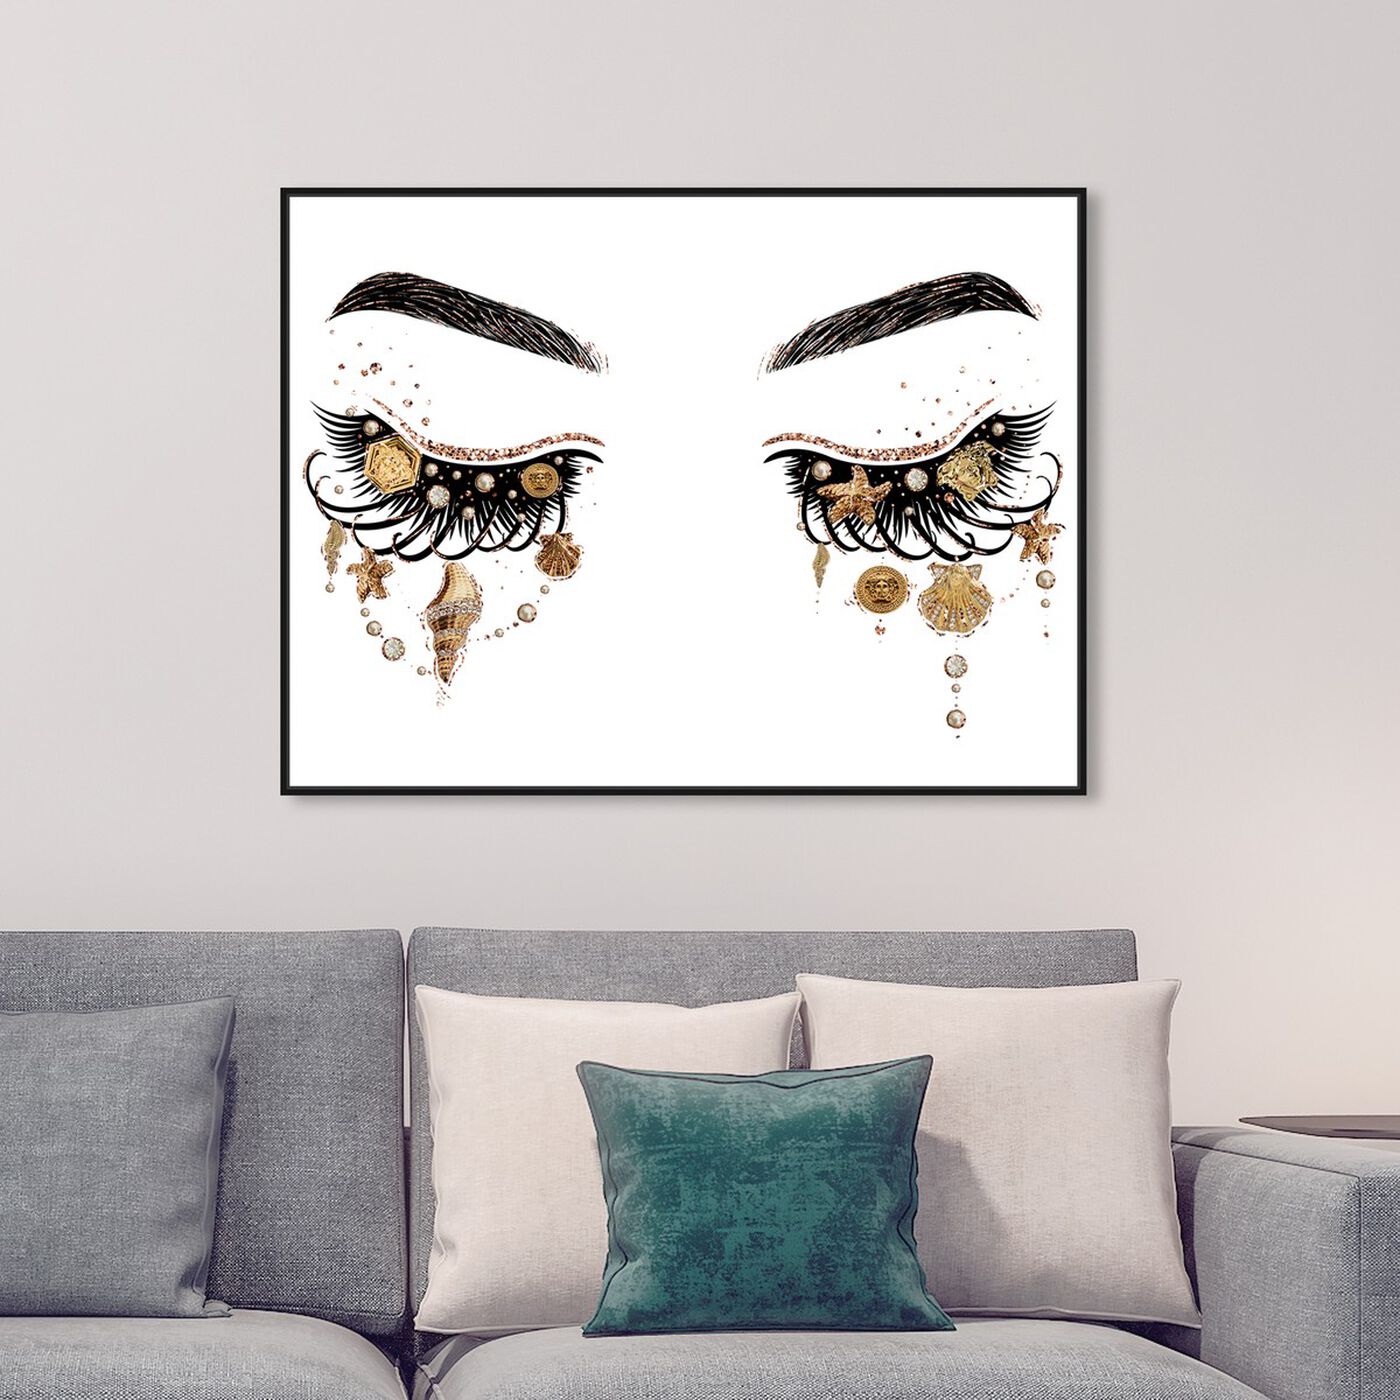 Hanging view of Gianni Eyes and Treasures featuring fashion and glam and makeup art.